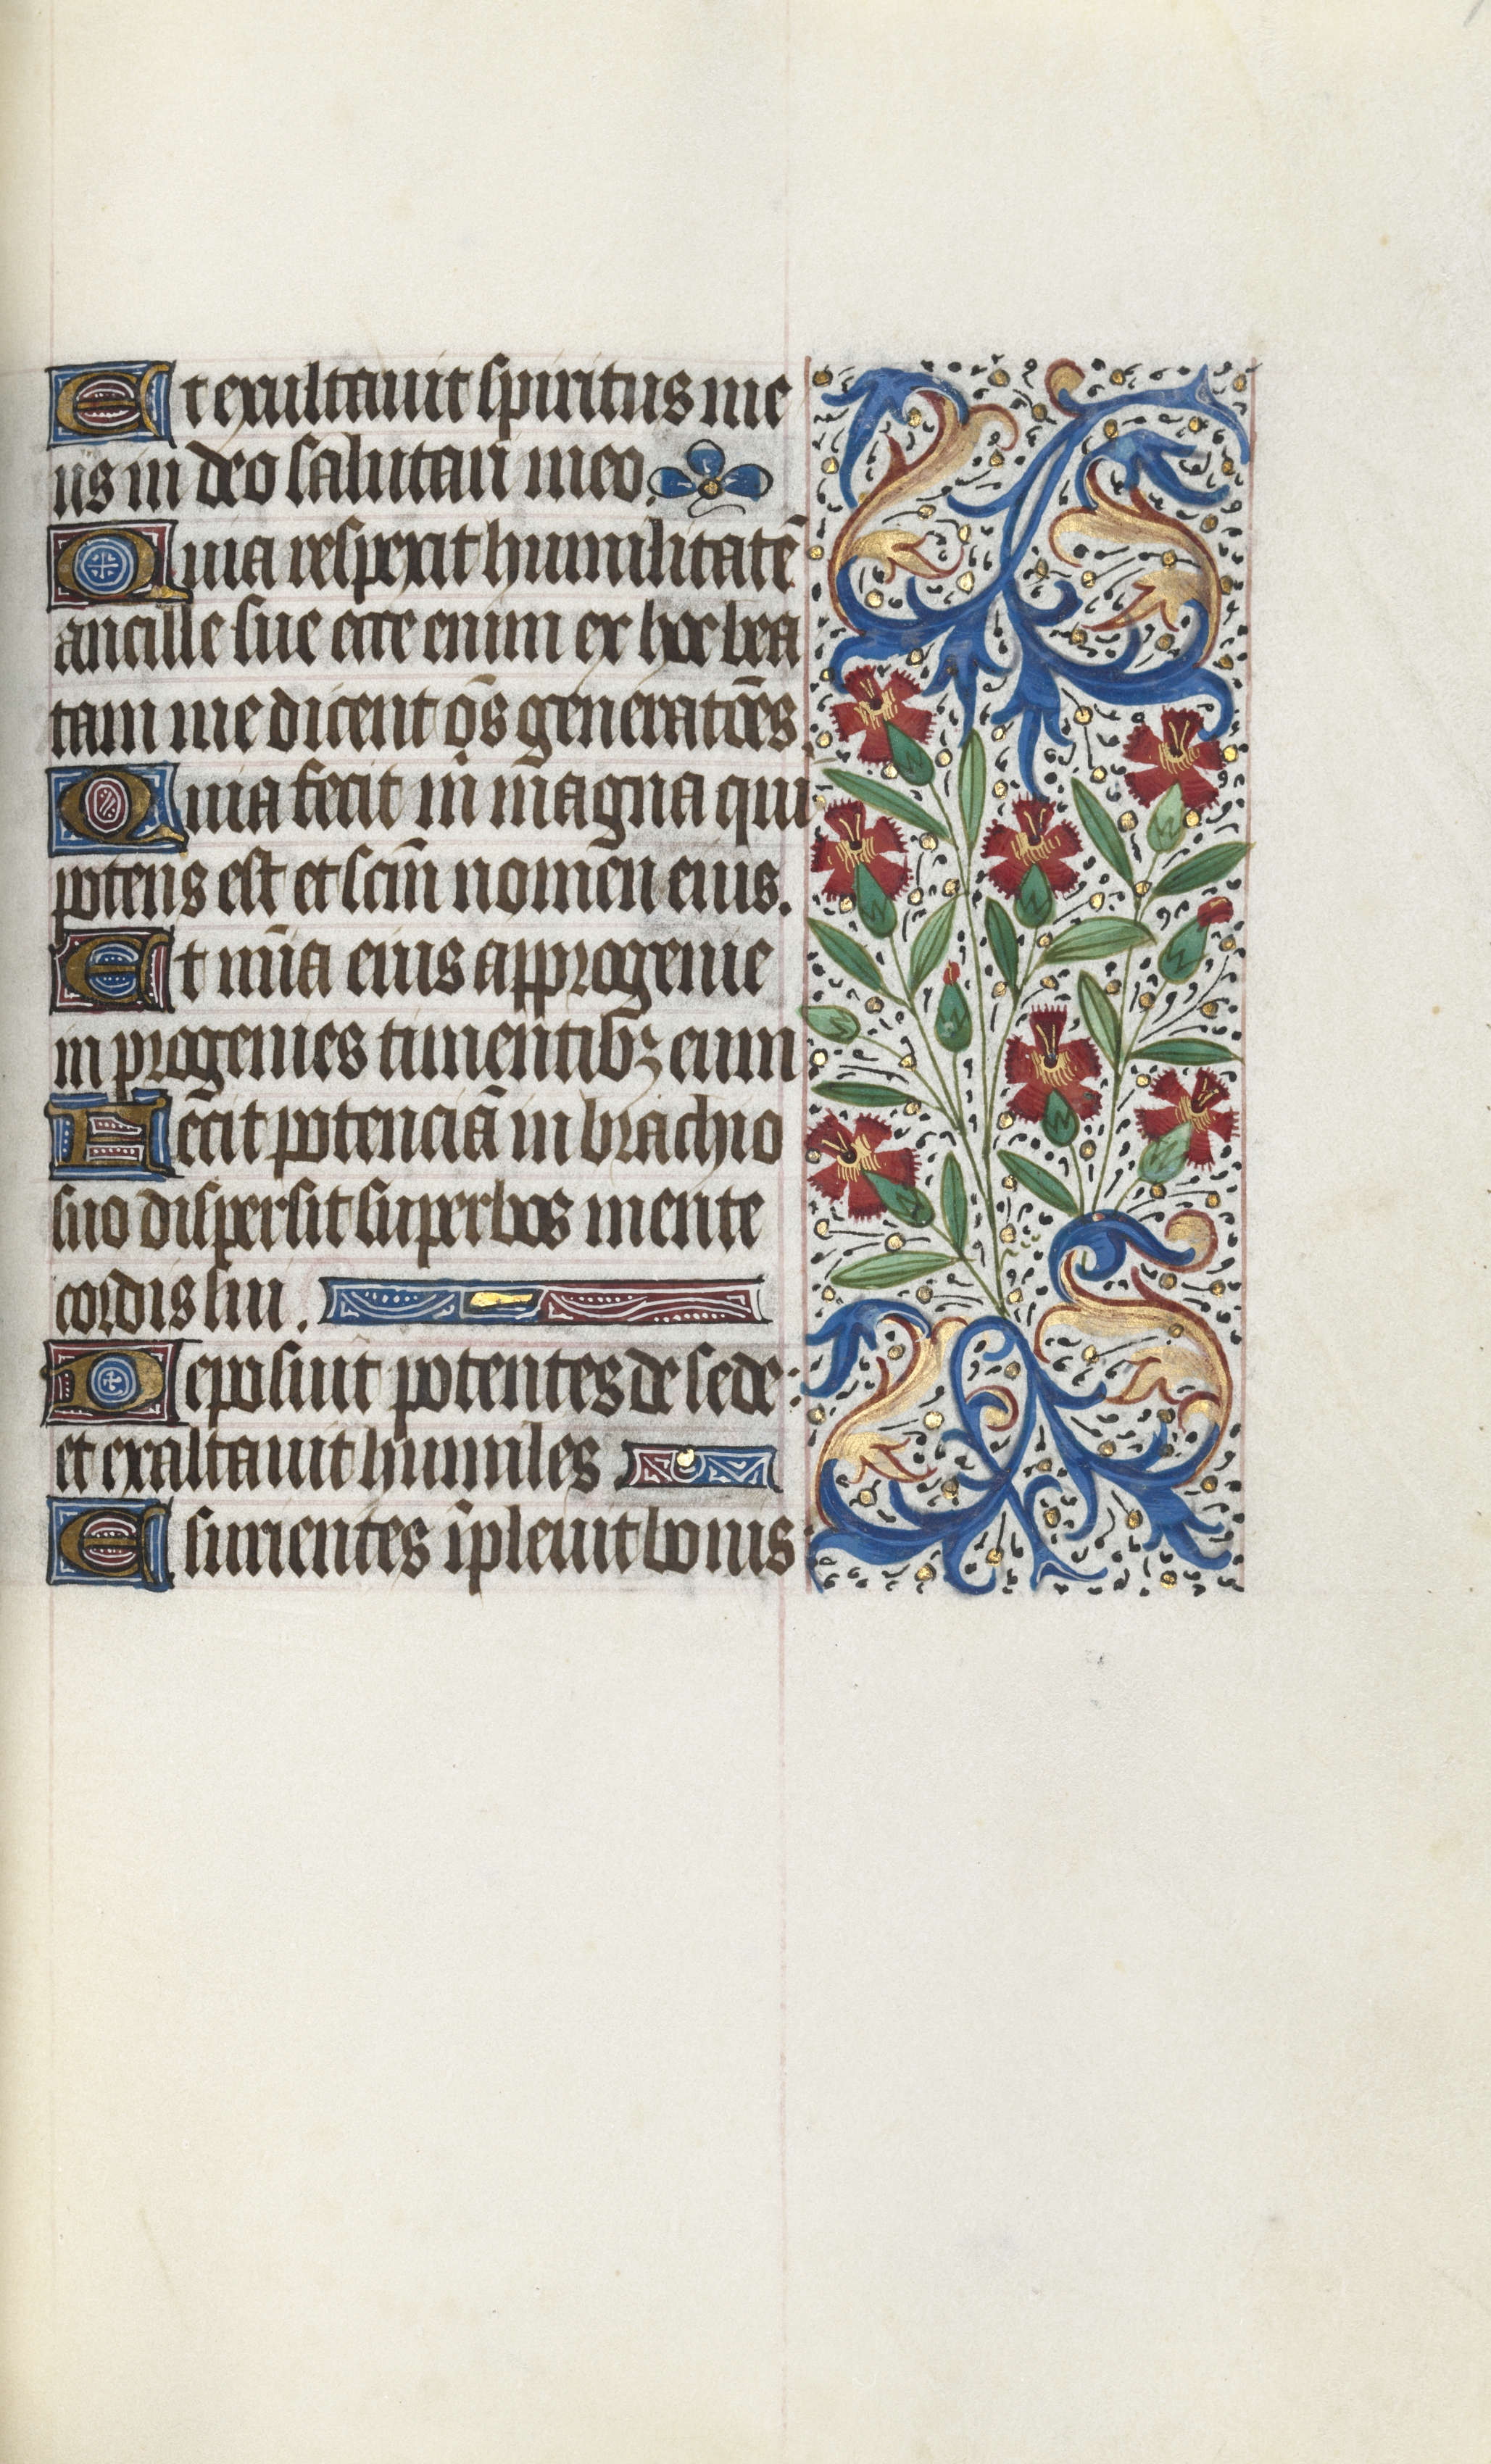 Book of Hours (Use of Rouen): fol. 74r